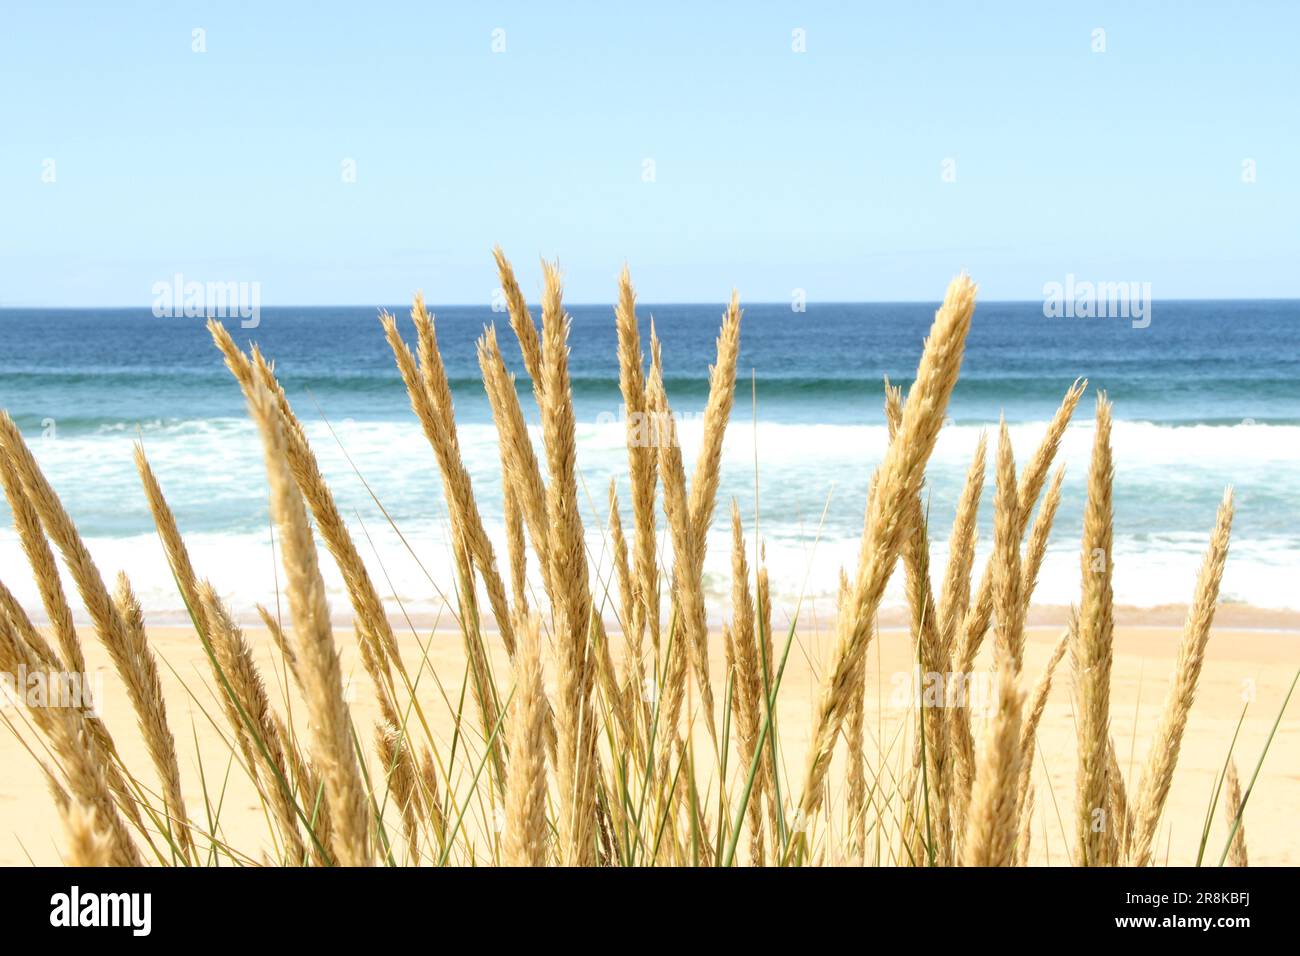 View to beautiful calm deep blue and emerald green ocean beach from coastal sand dunes and grasses. Small surf on a clear, bright sunny day. Stock Photo